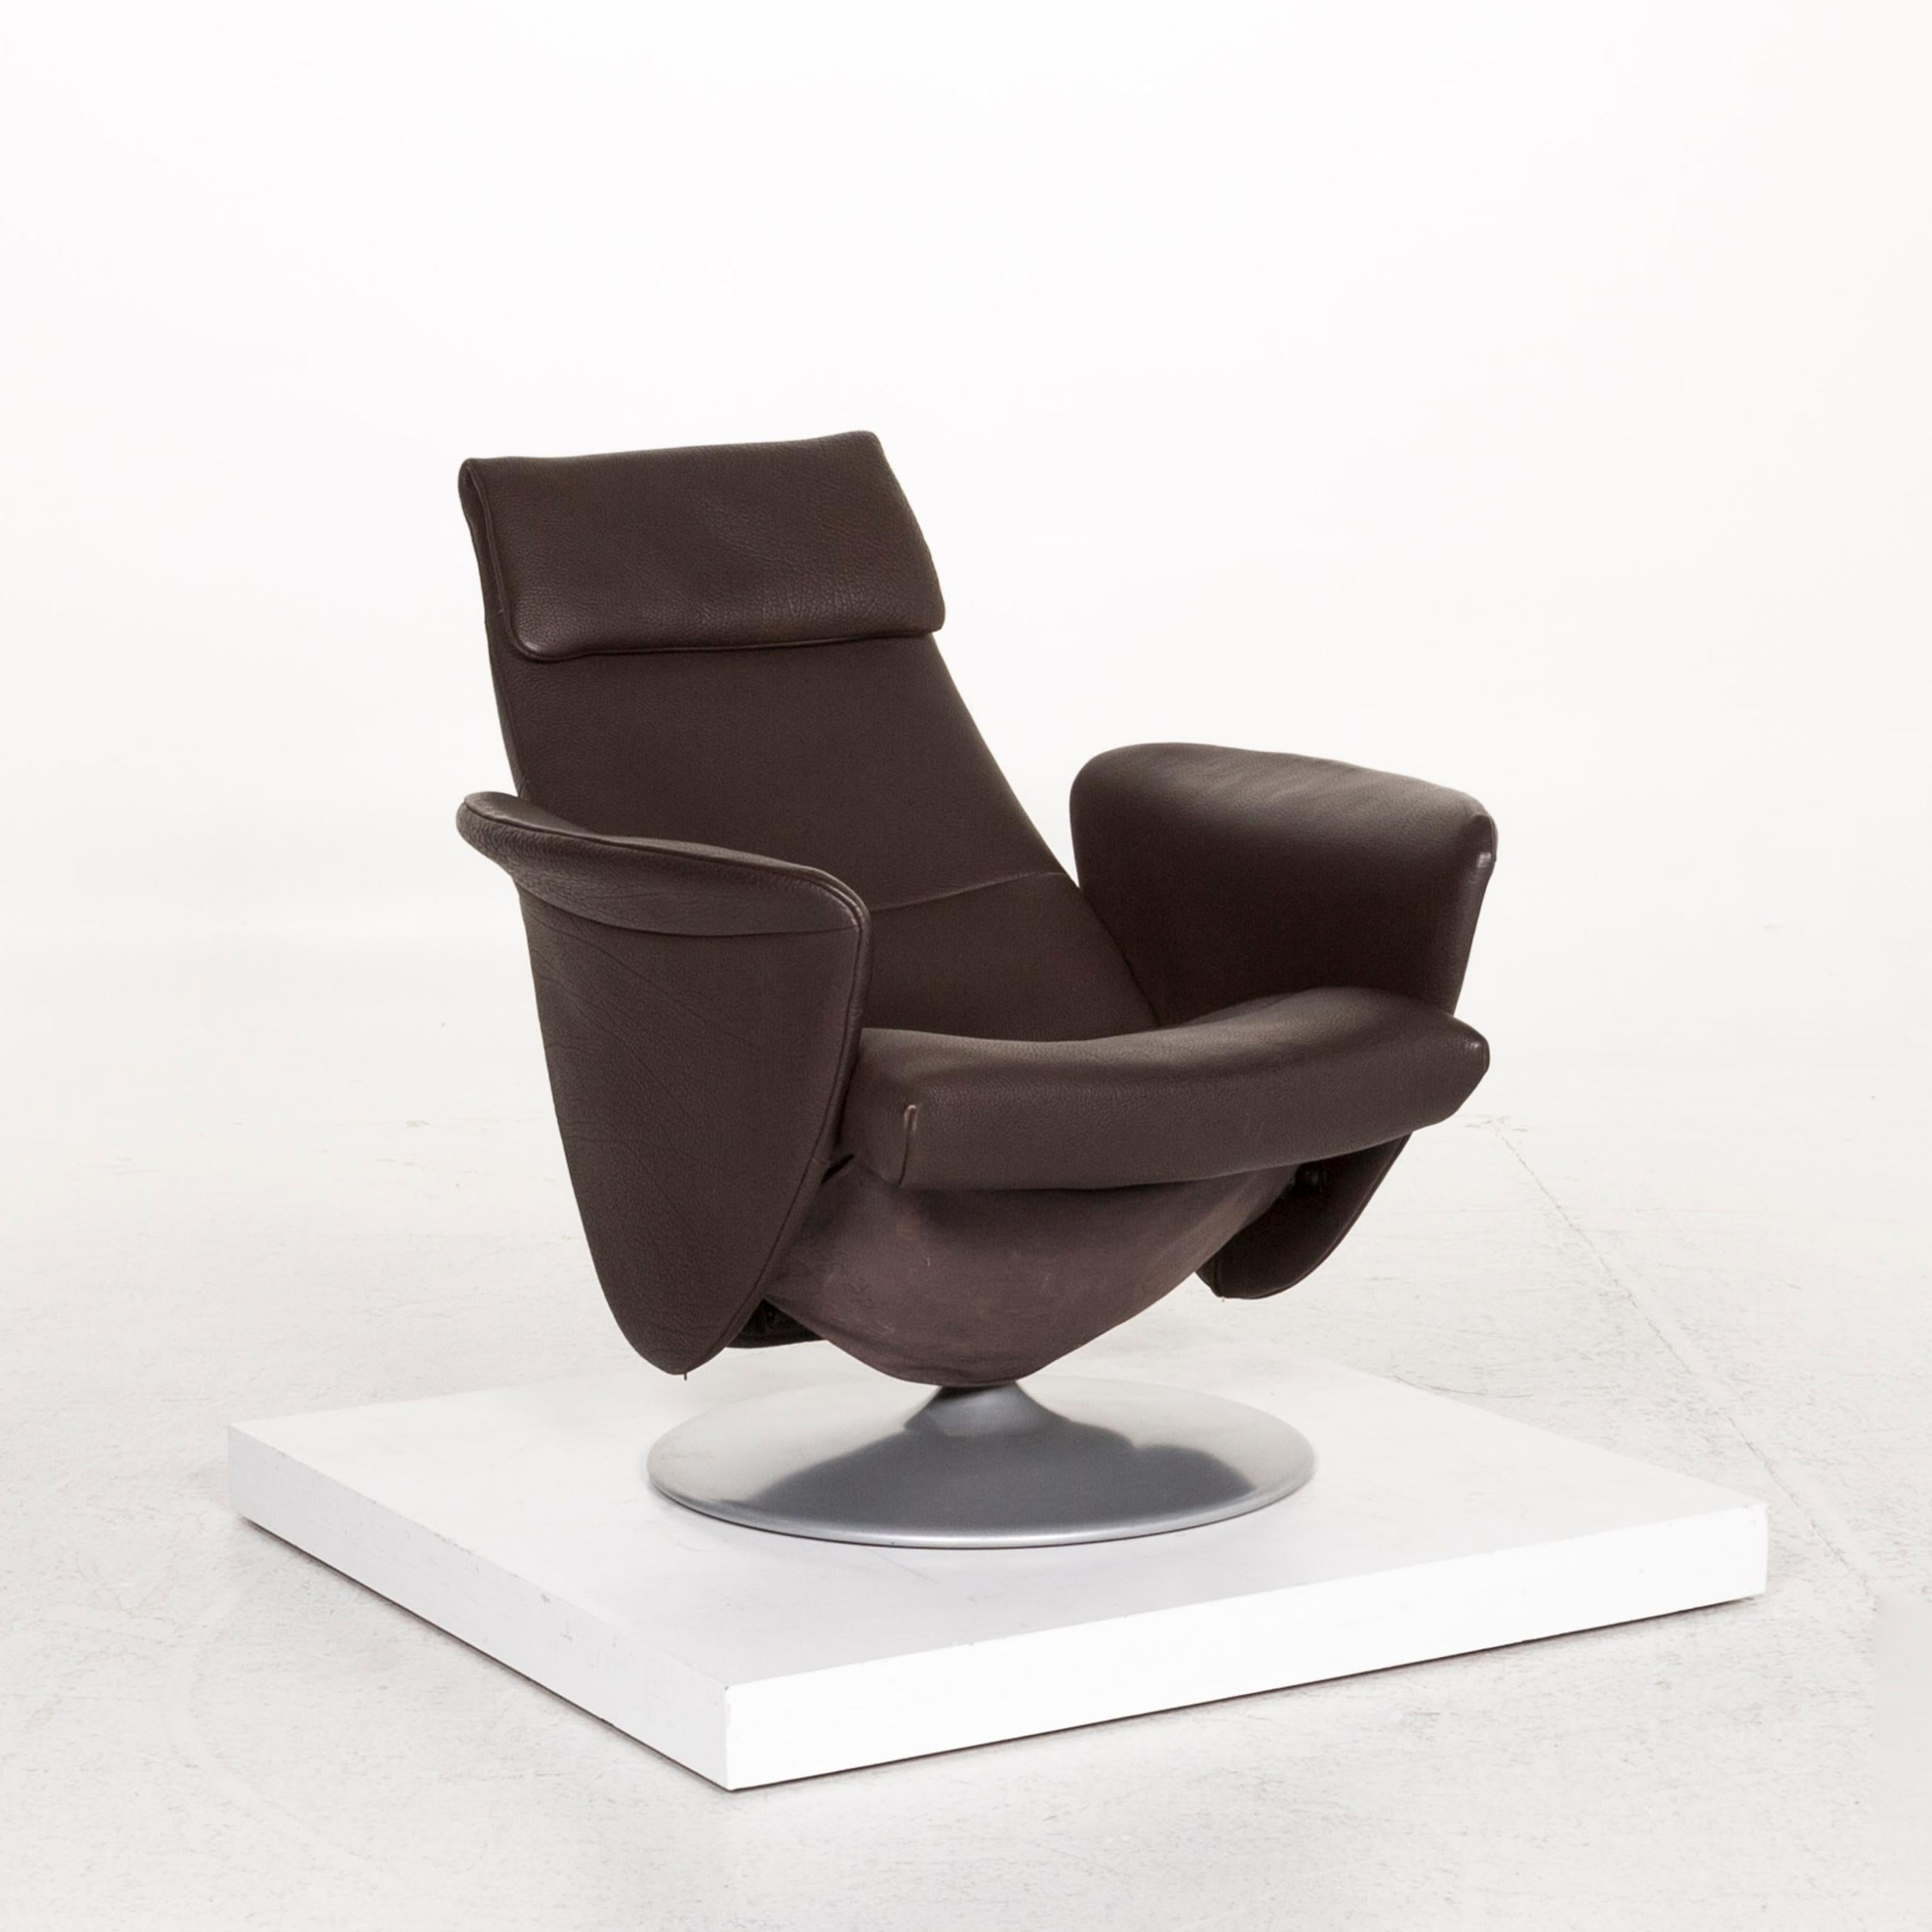 We bring to you a de Sede leather armchair brown dark brown function relax function relax armchair.

 

 Product measurements in centimeters:
 

Depth 79
Width 81
Height 107
Seat-height 43
Rest-height 60
Seat-depth 52
Seat-width